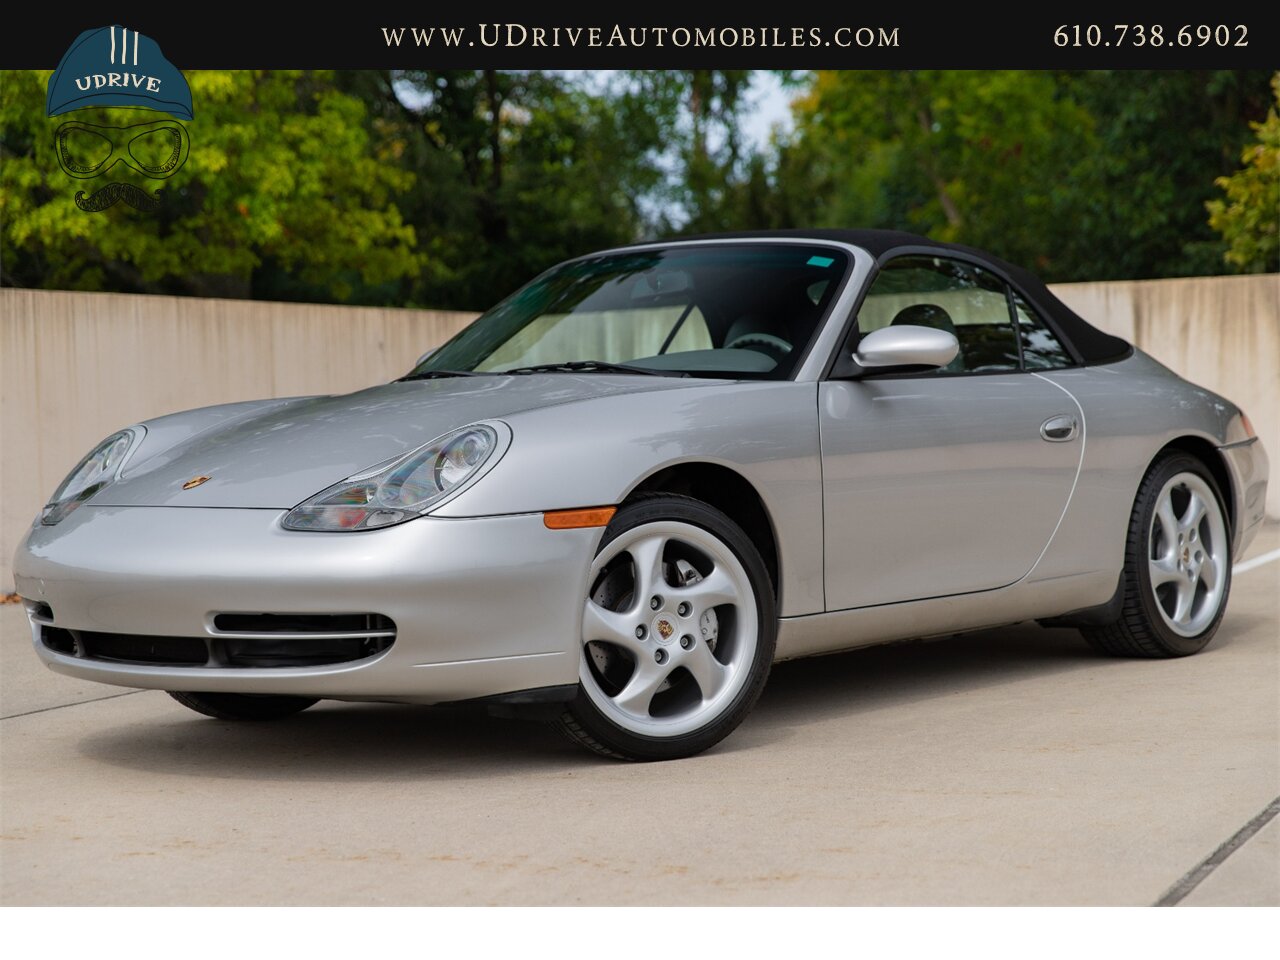 2001 Porsche 911 Carrera 4 Cabriolet Tiptronic IMS Upgrade  Power Seats 18in Turbo Look Wheels 2 Owners $5k Recent Service - Photo 4 - West Chester, PA 19382